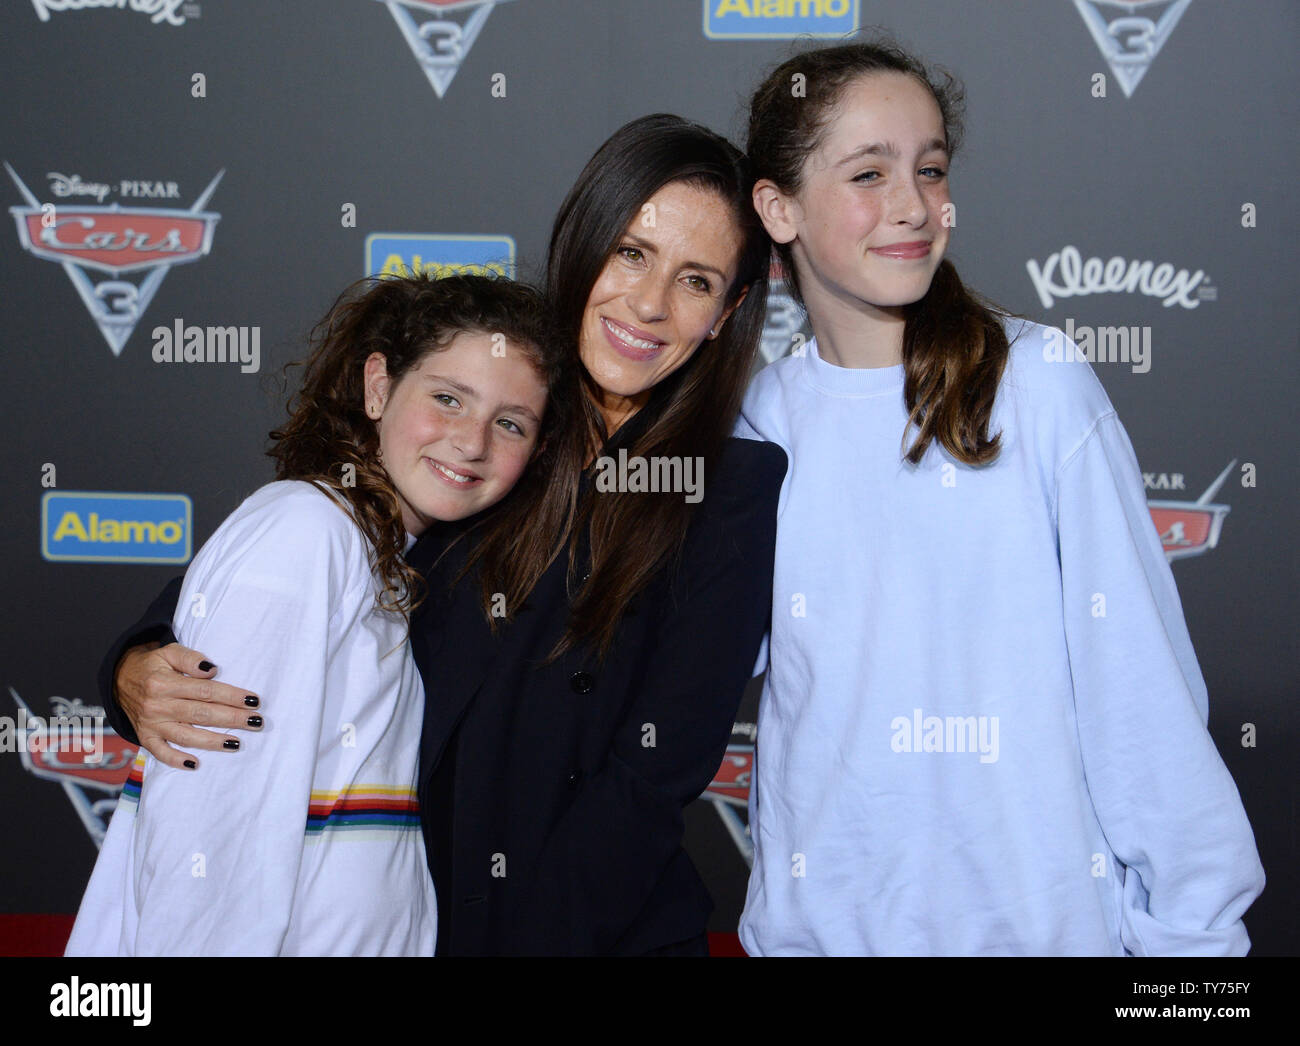 Actress Soleil Moon Frye (C) and her daughters attend the premiere of the motion picture comedy 'Cars 3' at the Anaheim Convention Center in Anaheim, California on June 10, 2017. Storyline: Lightning McQueen sets out to prove to a new generation of racers that he's still the best race car in the world.  Photo by Jim Ruymen/UPI Stock Photo